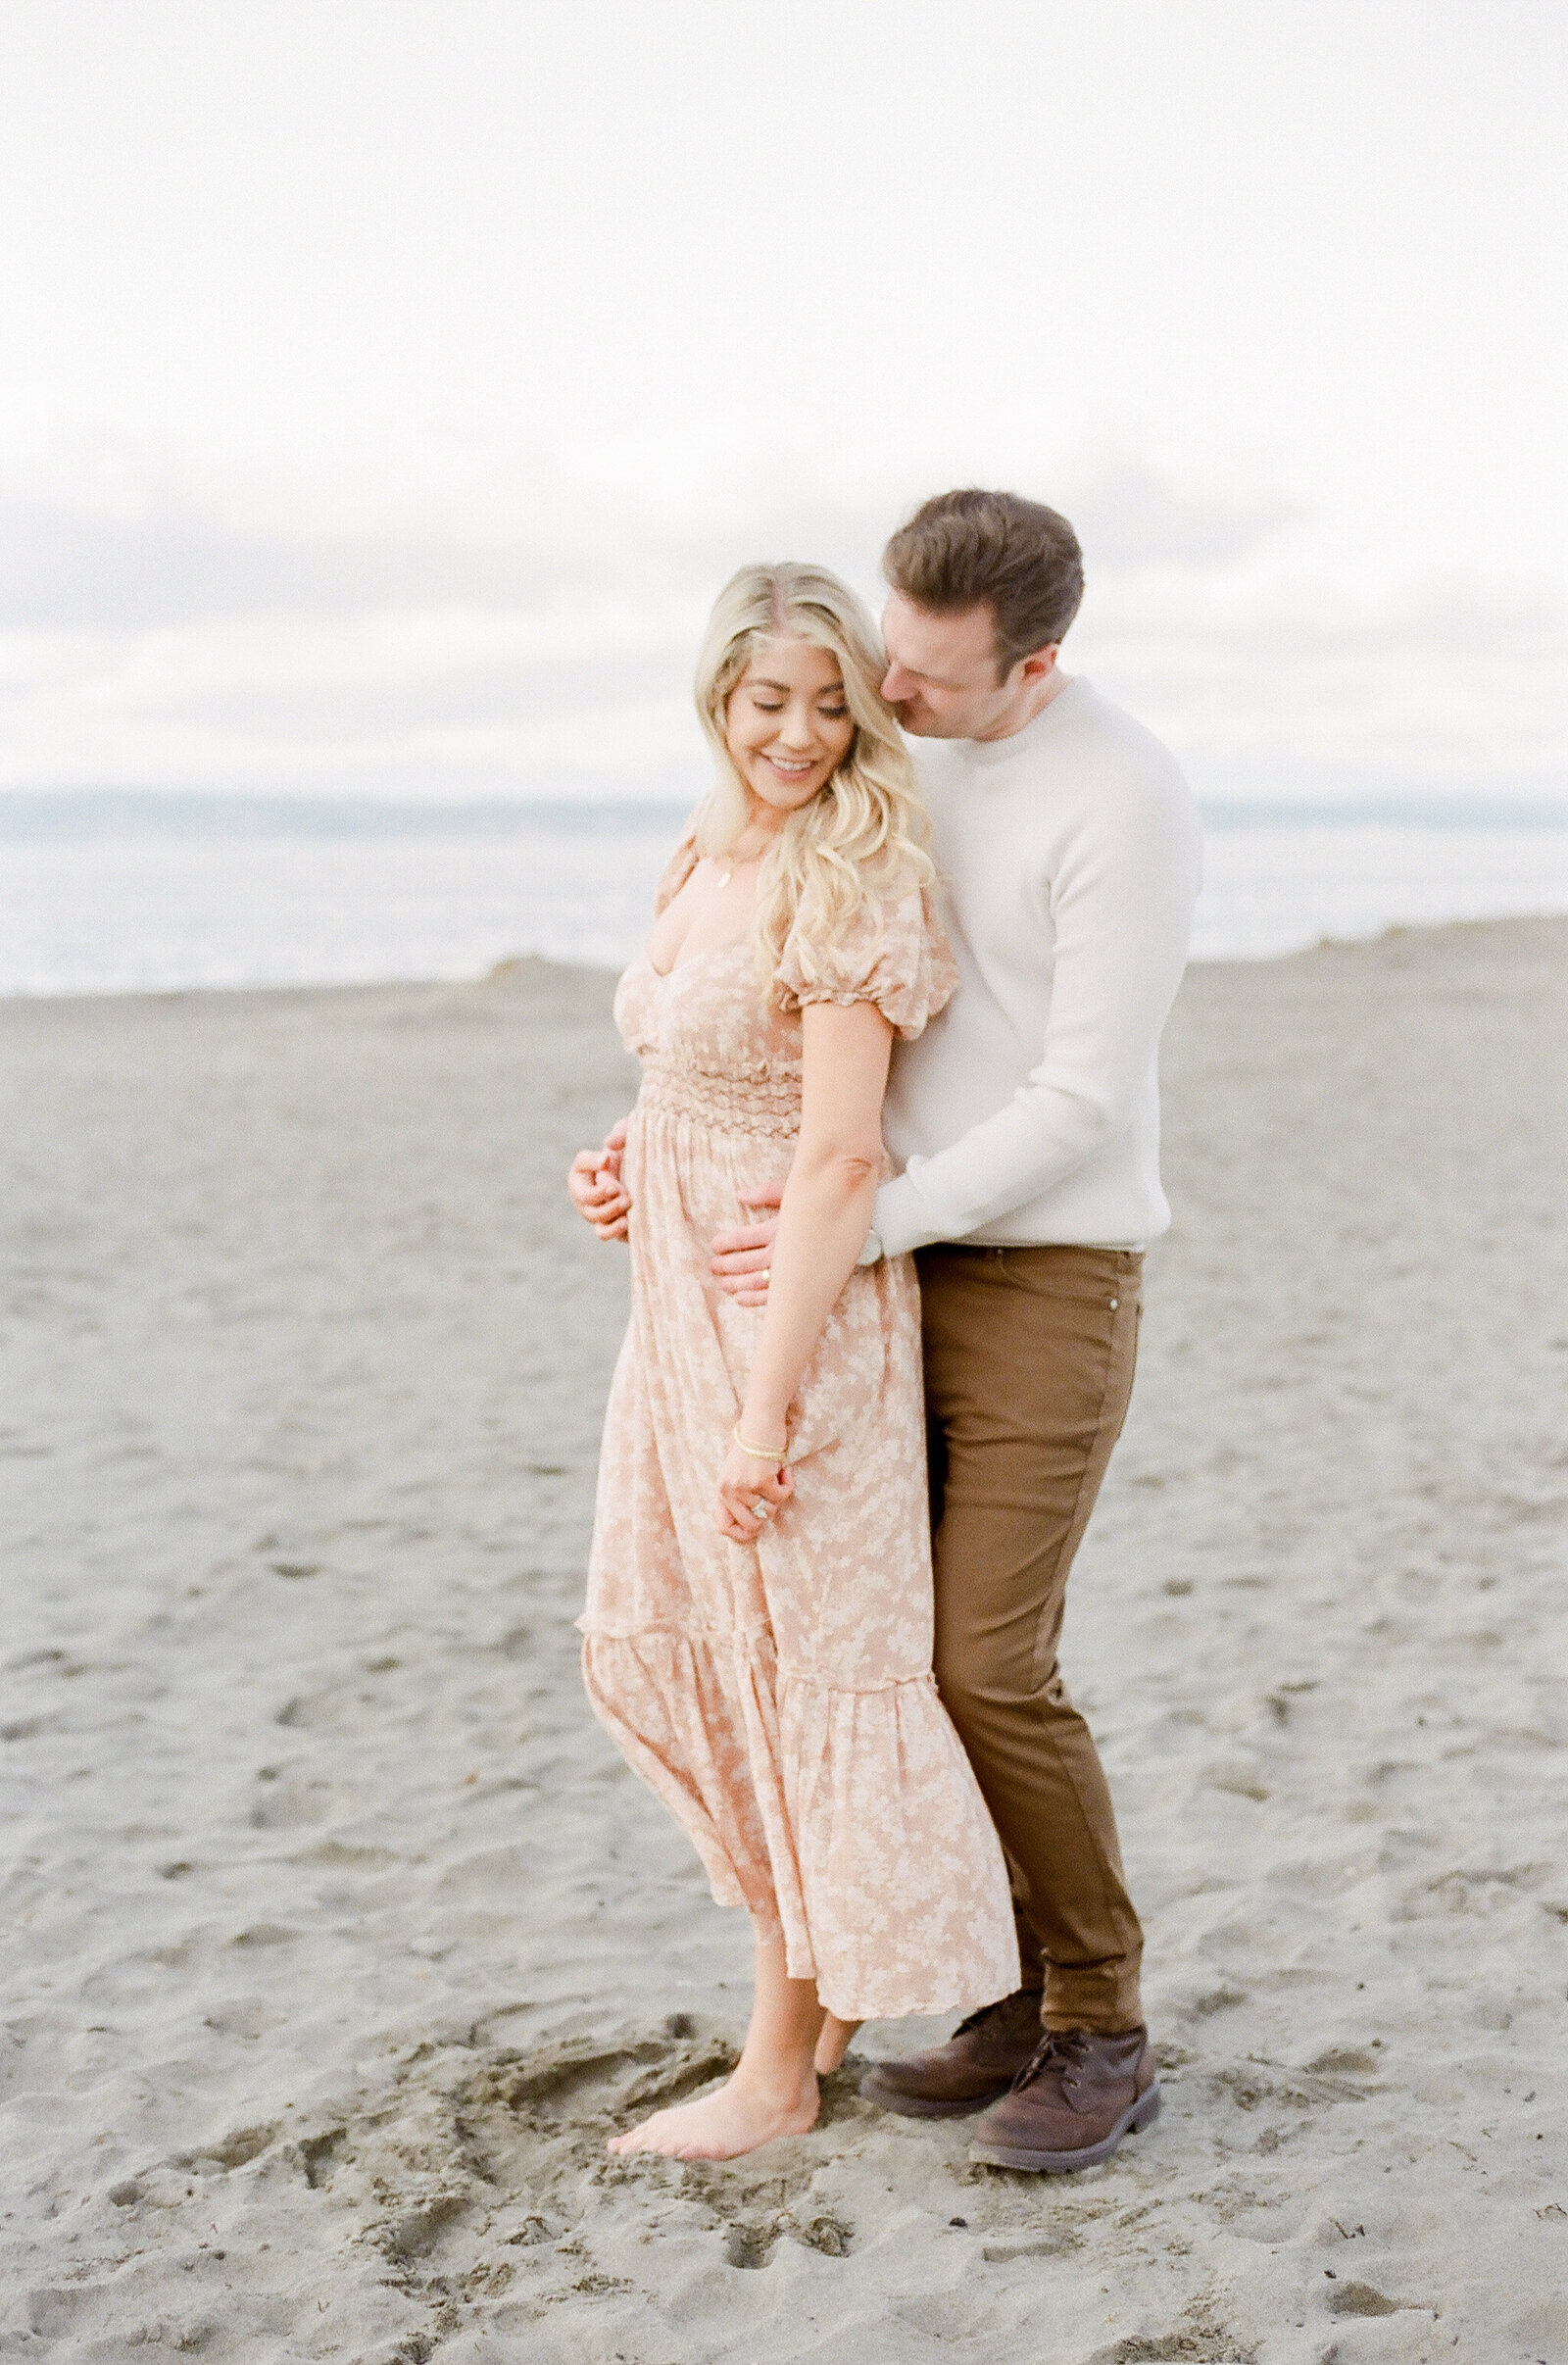 Brittany and Steven - Golden Gardens Park - Kerry Jeanne Photography (100 of 200)